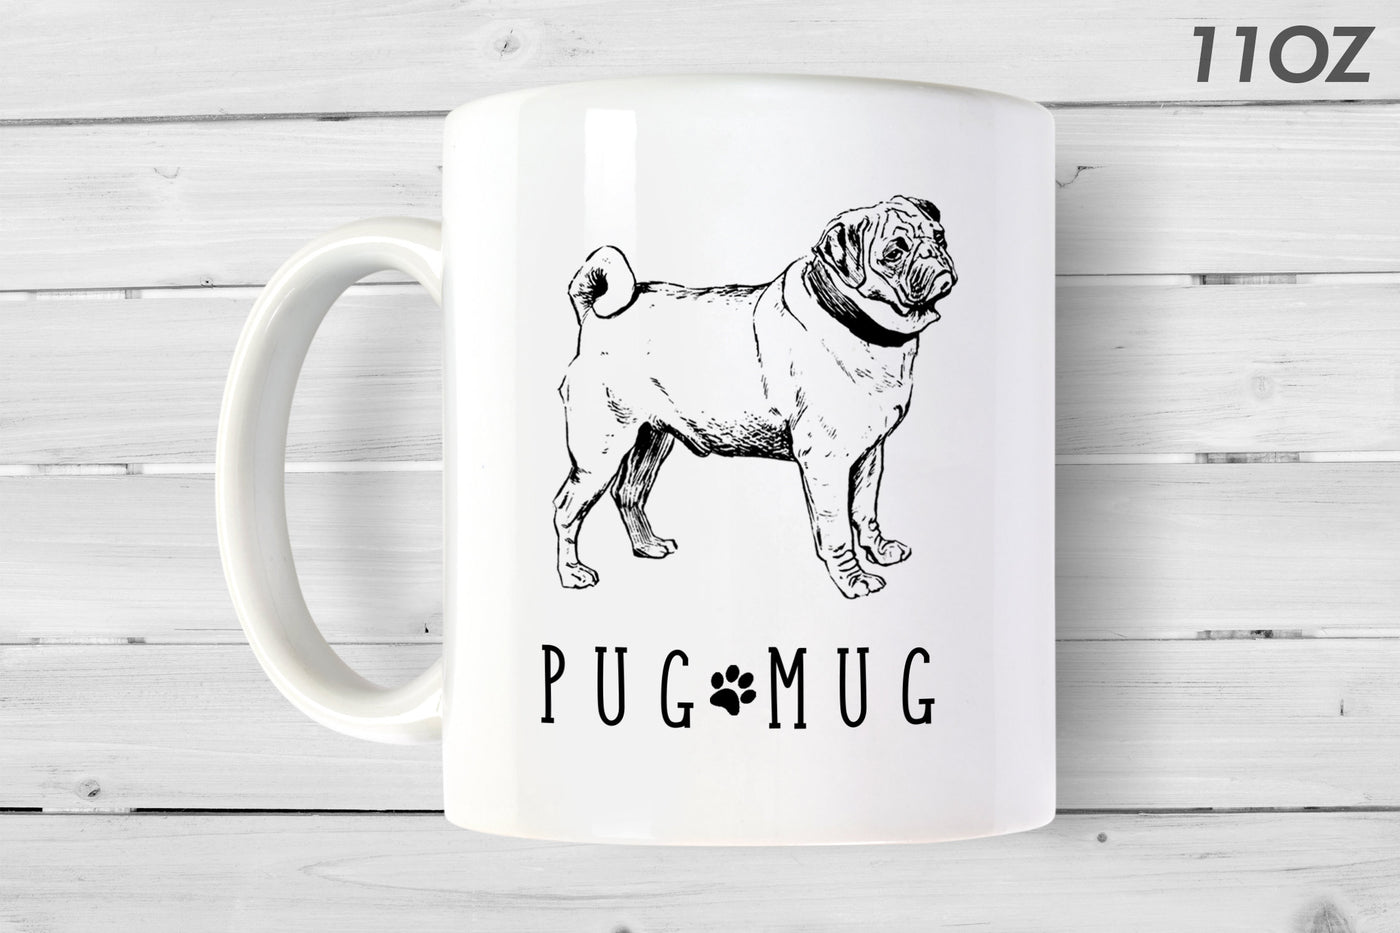 Pug Mug - White Ceramic 11 OZ Mug - Gift for her - Gift for him - Kitchen - Pets - Pugs - Quotes - Dogs - Home - Pug Lovers - Dog Lovers